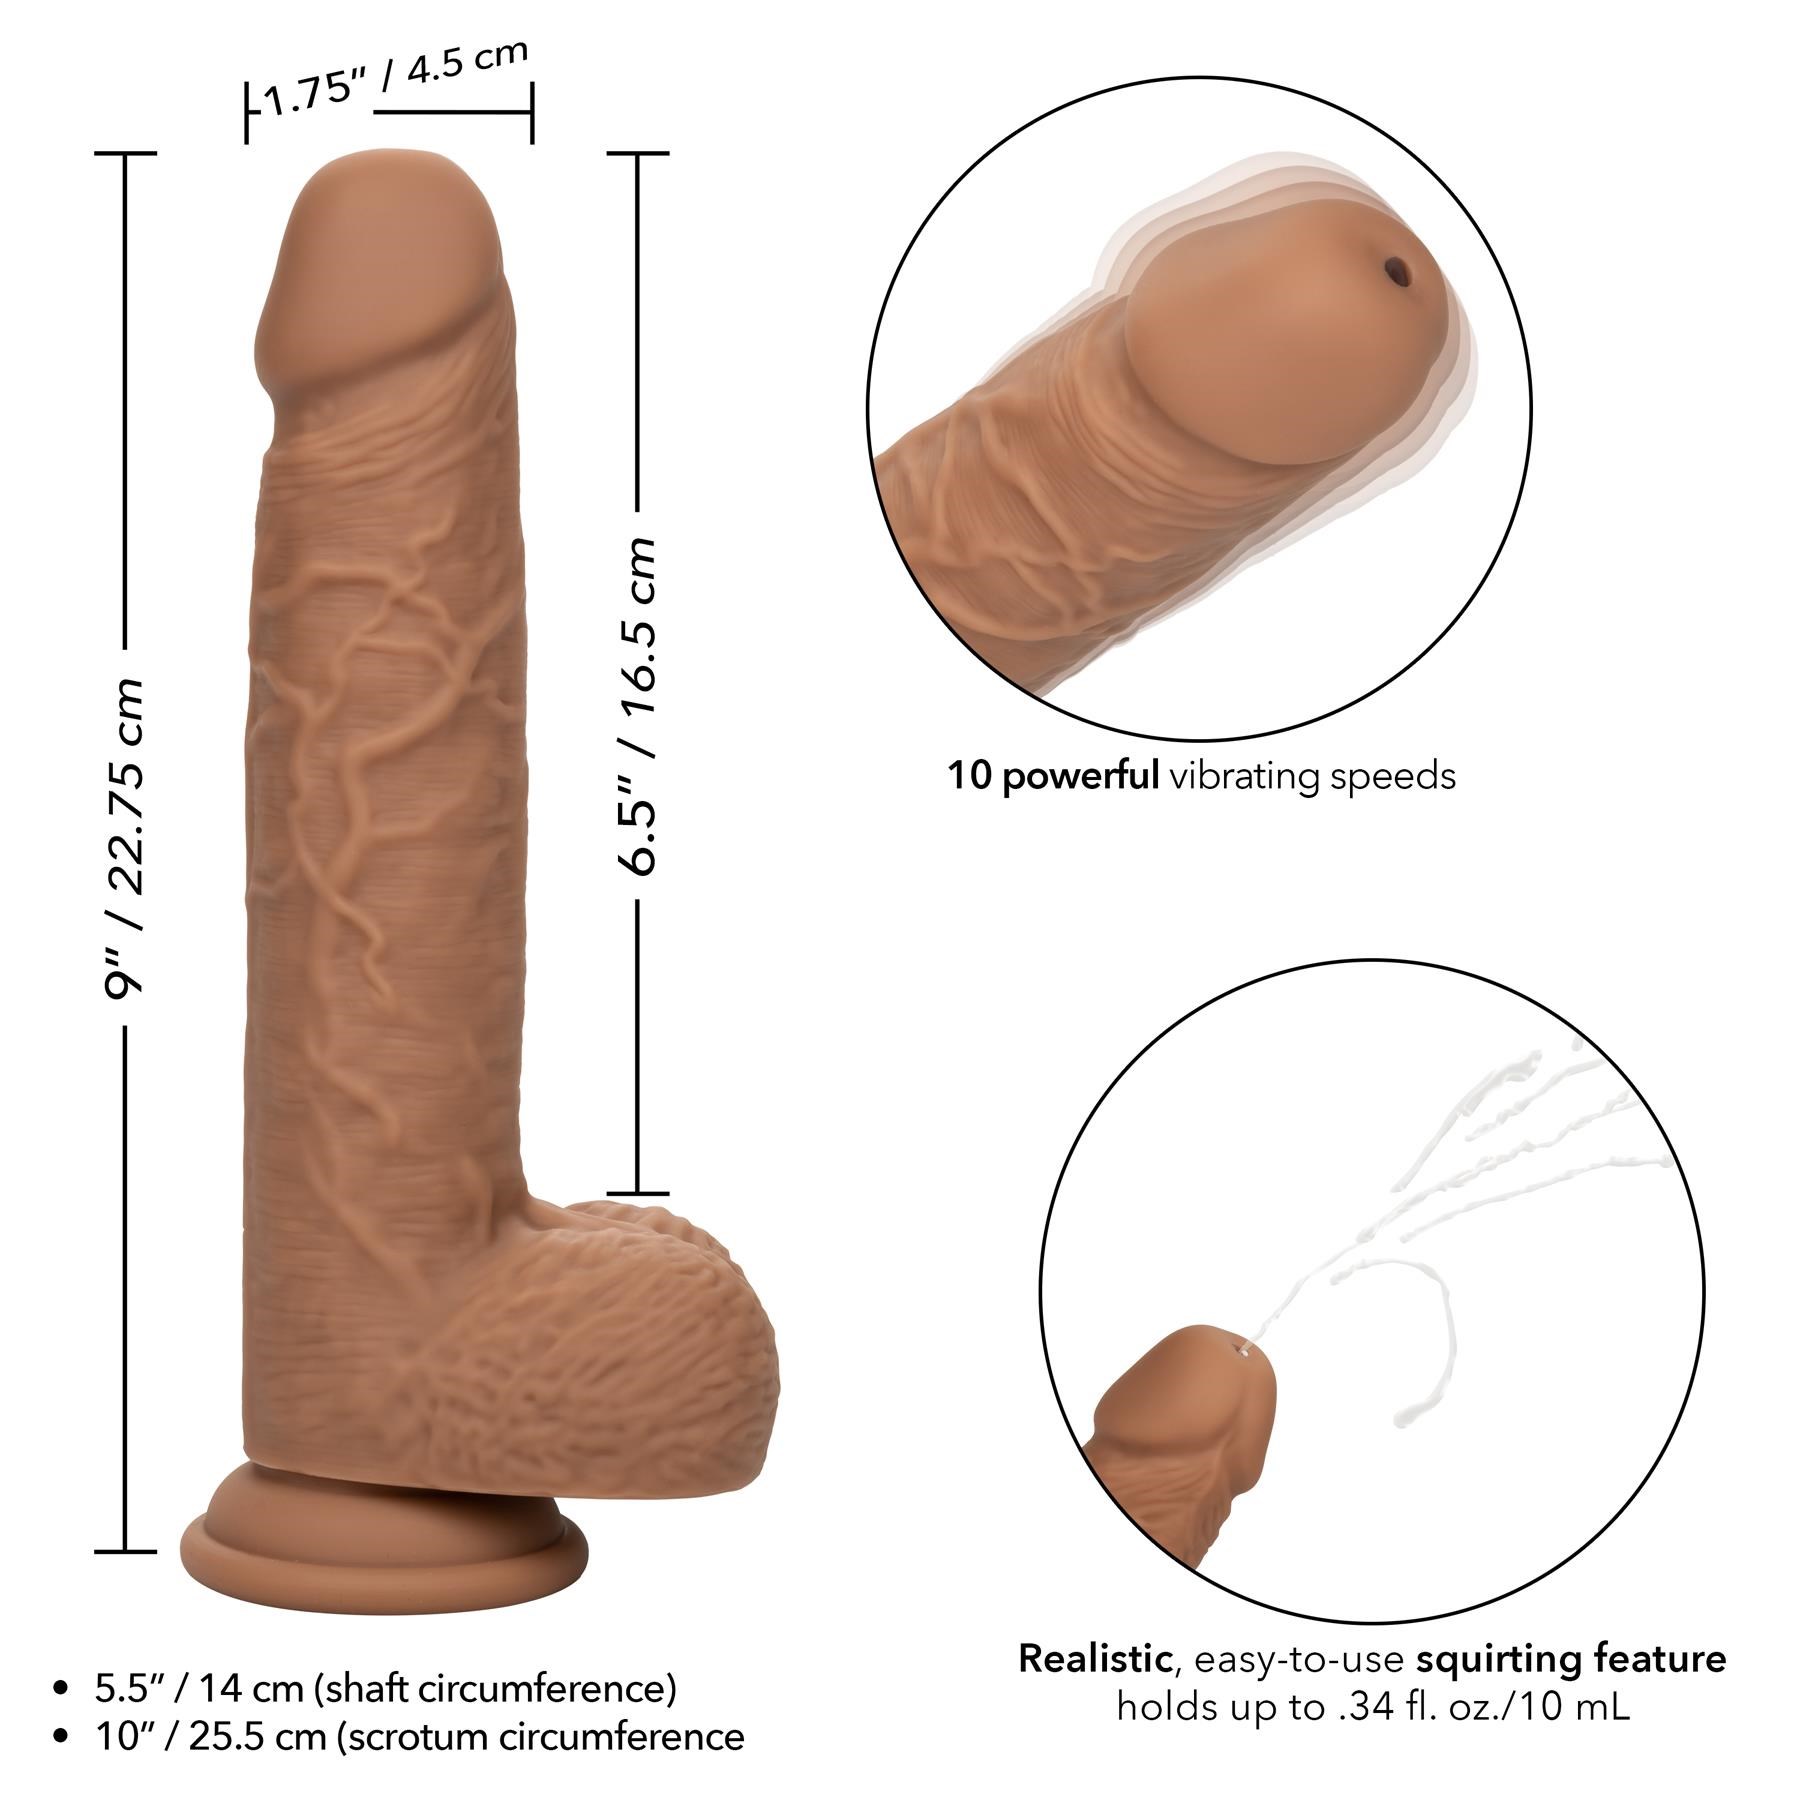 F*ck Stick Squirting and Vibrating Dildo- Dimensions and Instructions